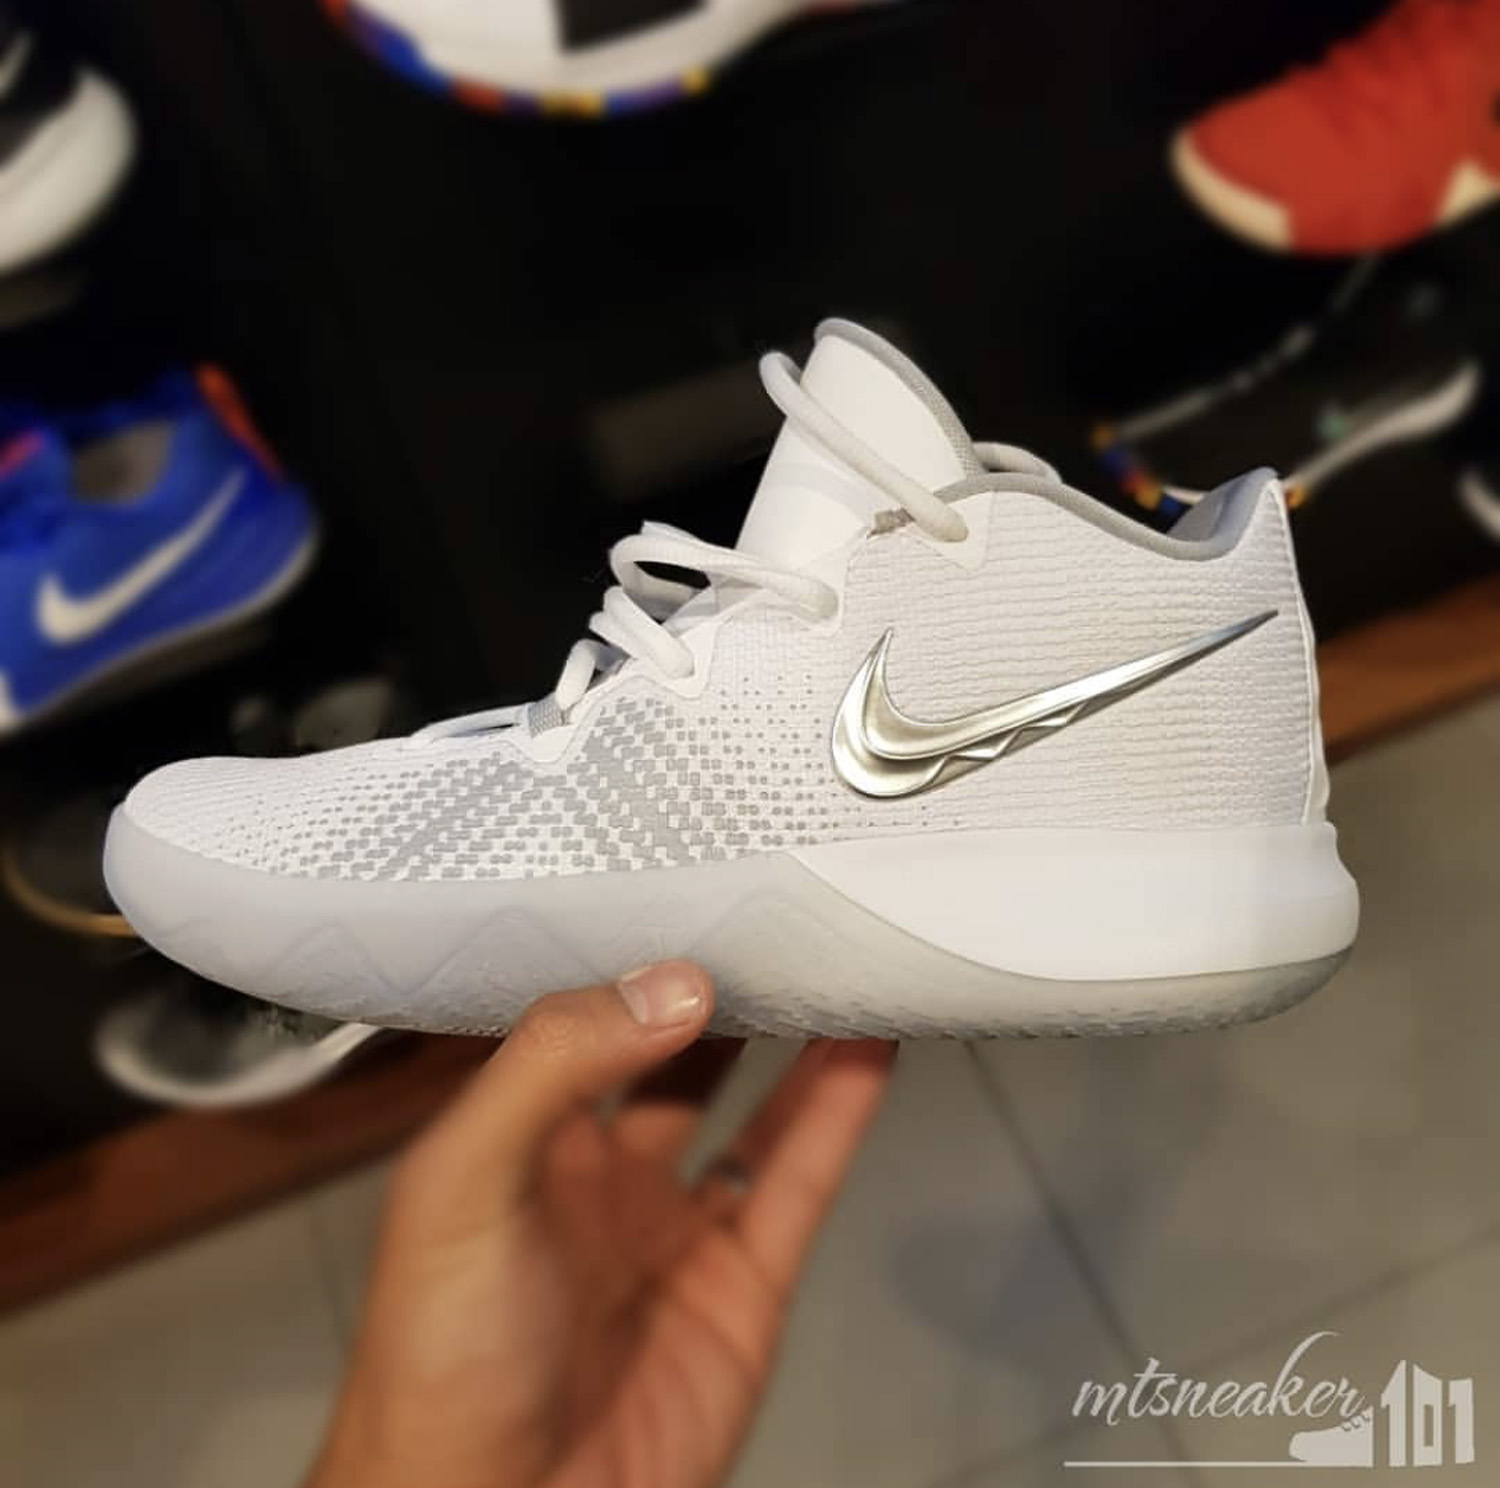 The Nike Kyrie Flytrap Surfaces in New 